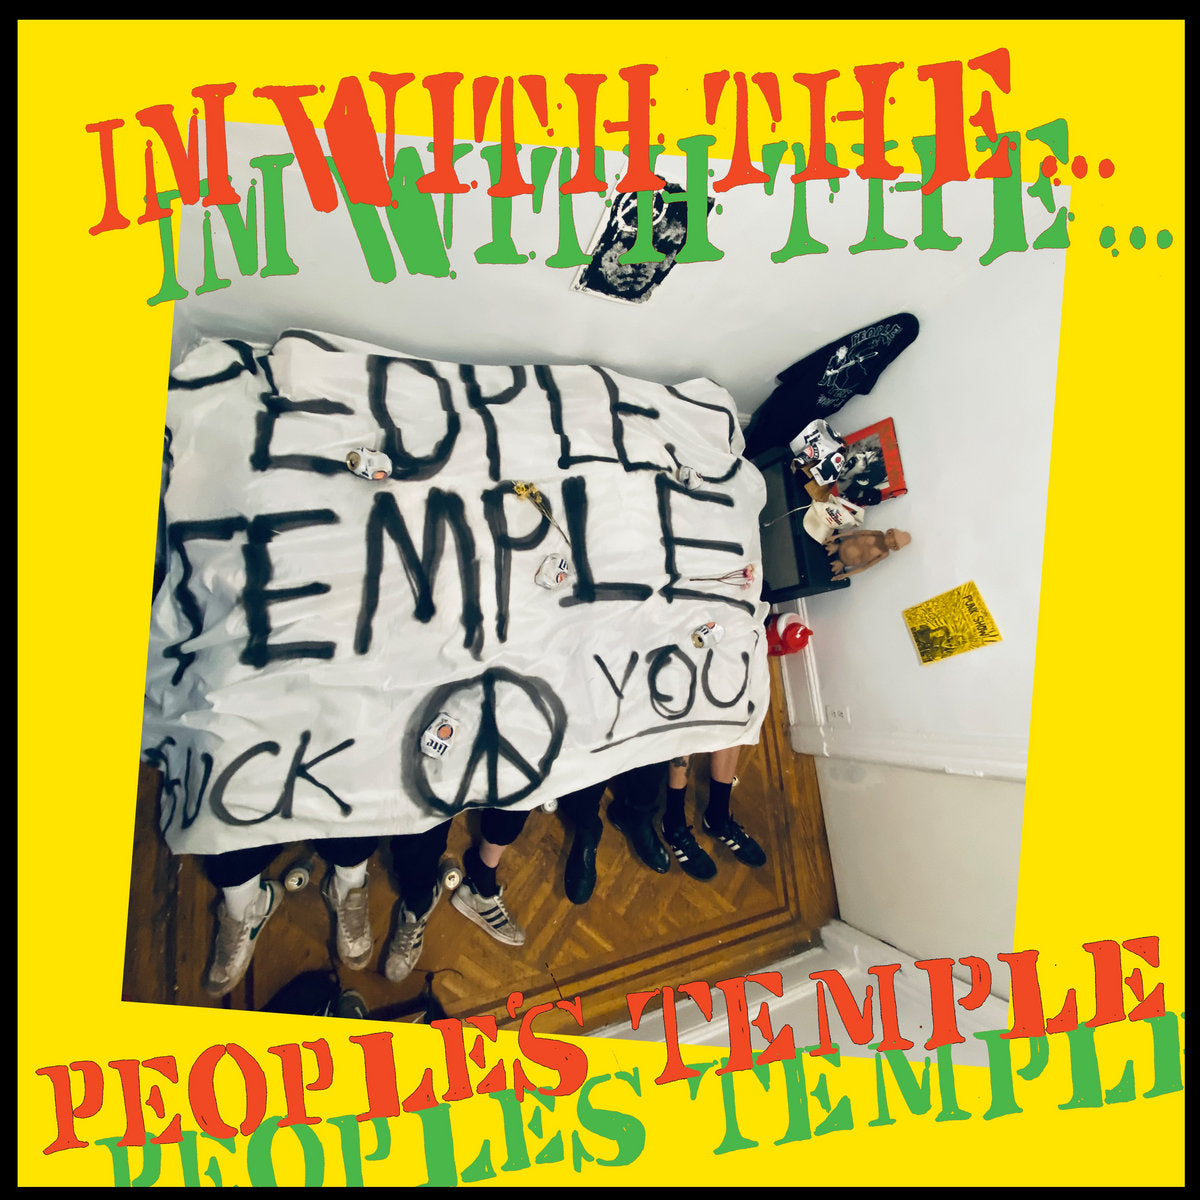 PEOPLE'S TEMPLE - I'M WITH THE PEOPLE'S TEMPLE Vinyl 7"